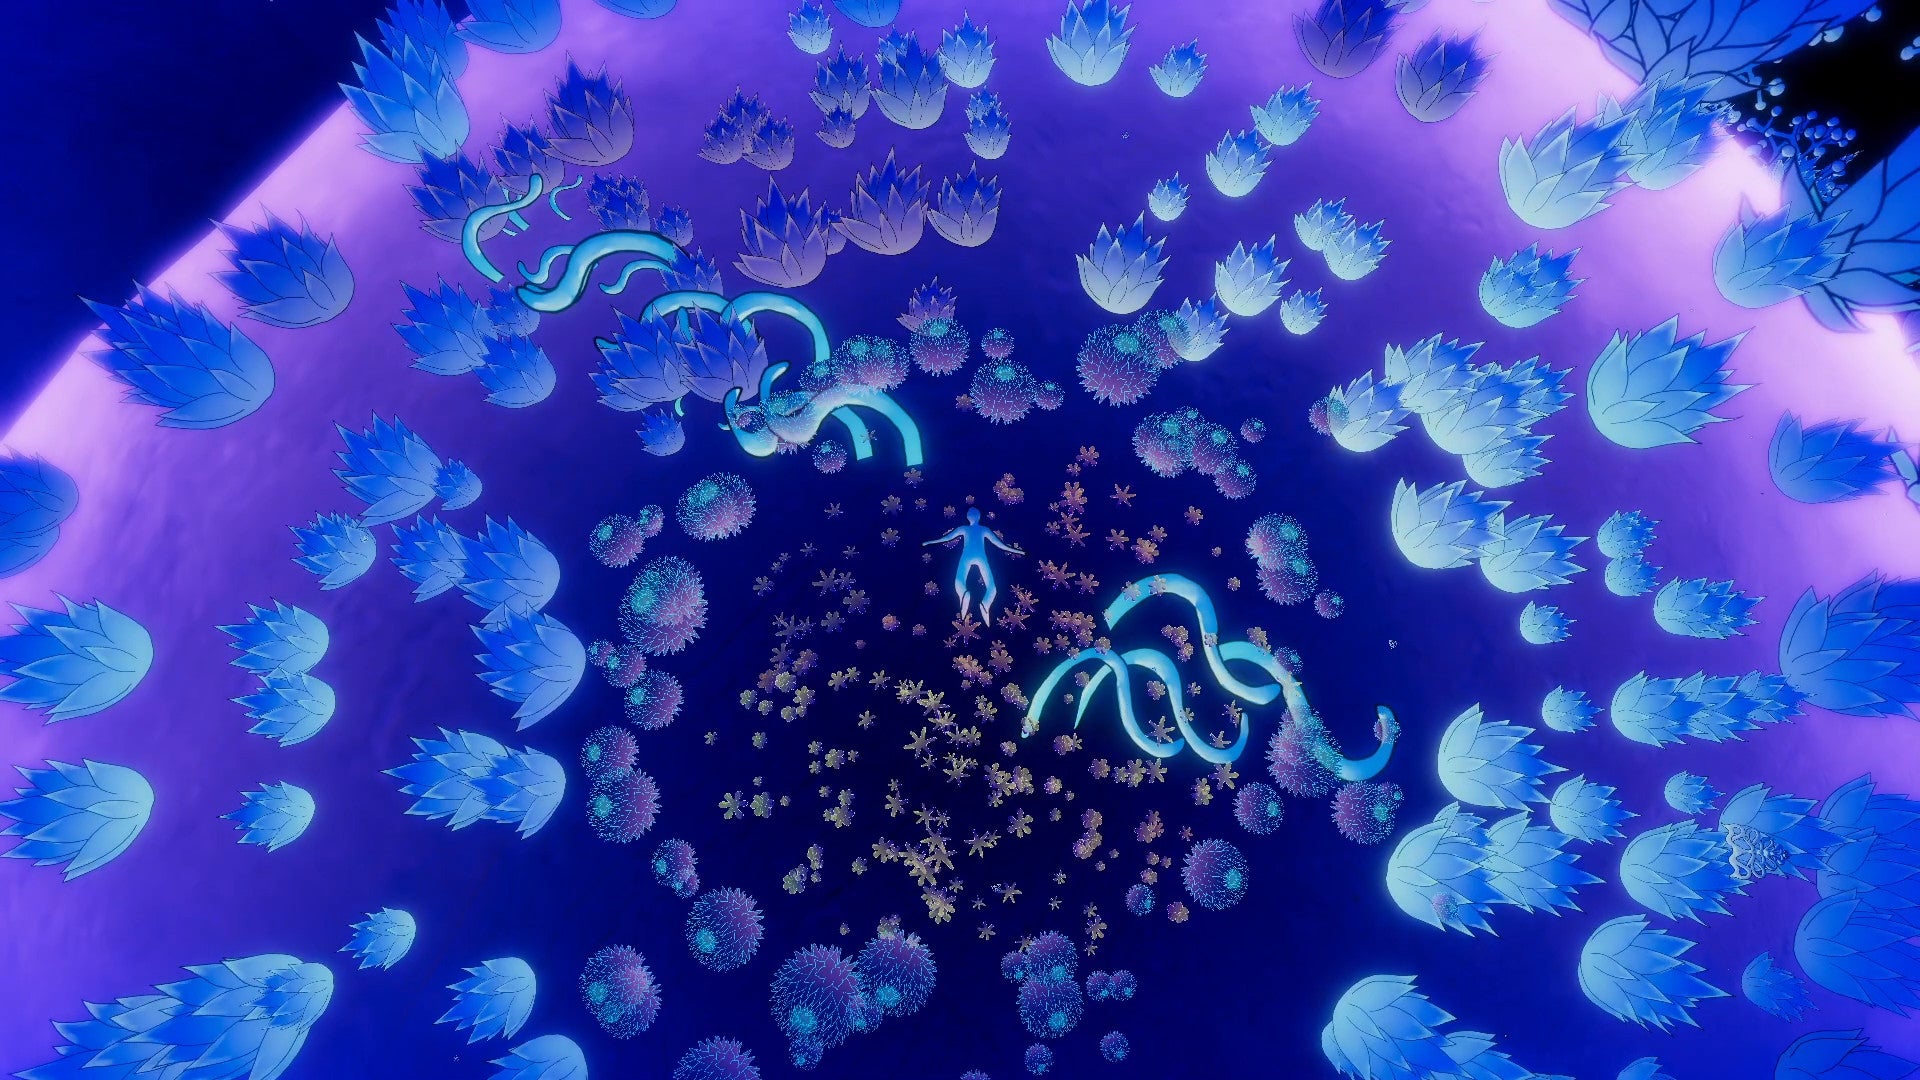 A small human is surrounded by very blue deep sea creatures.